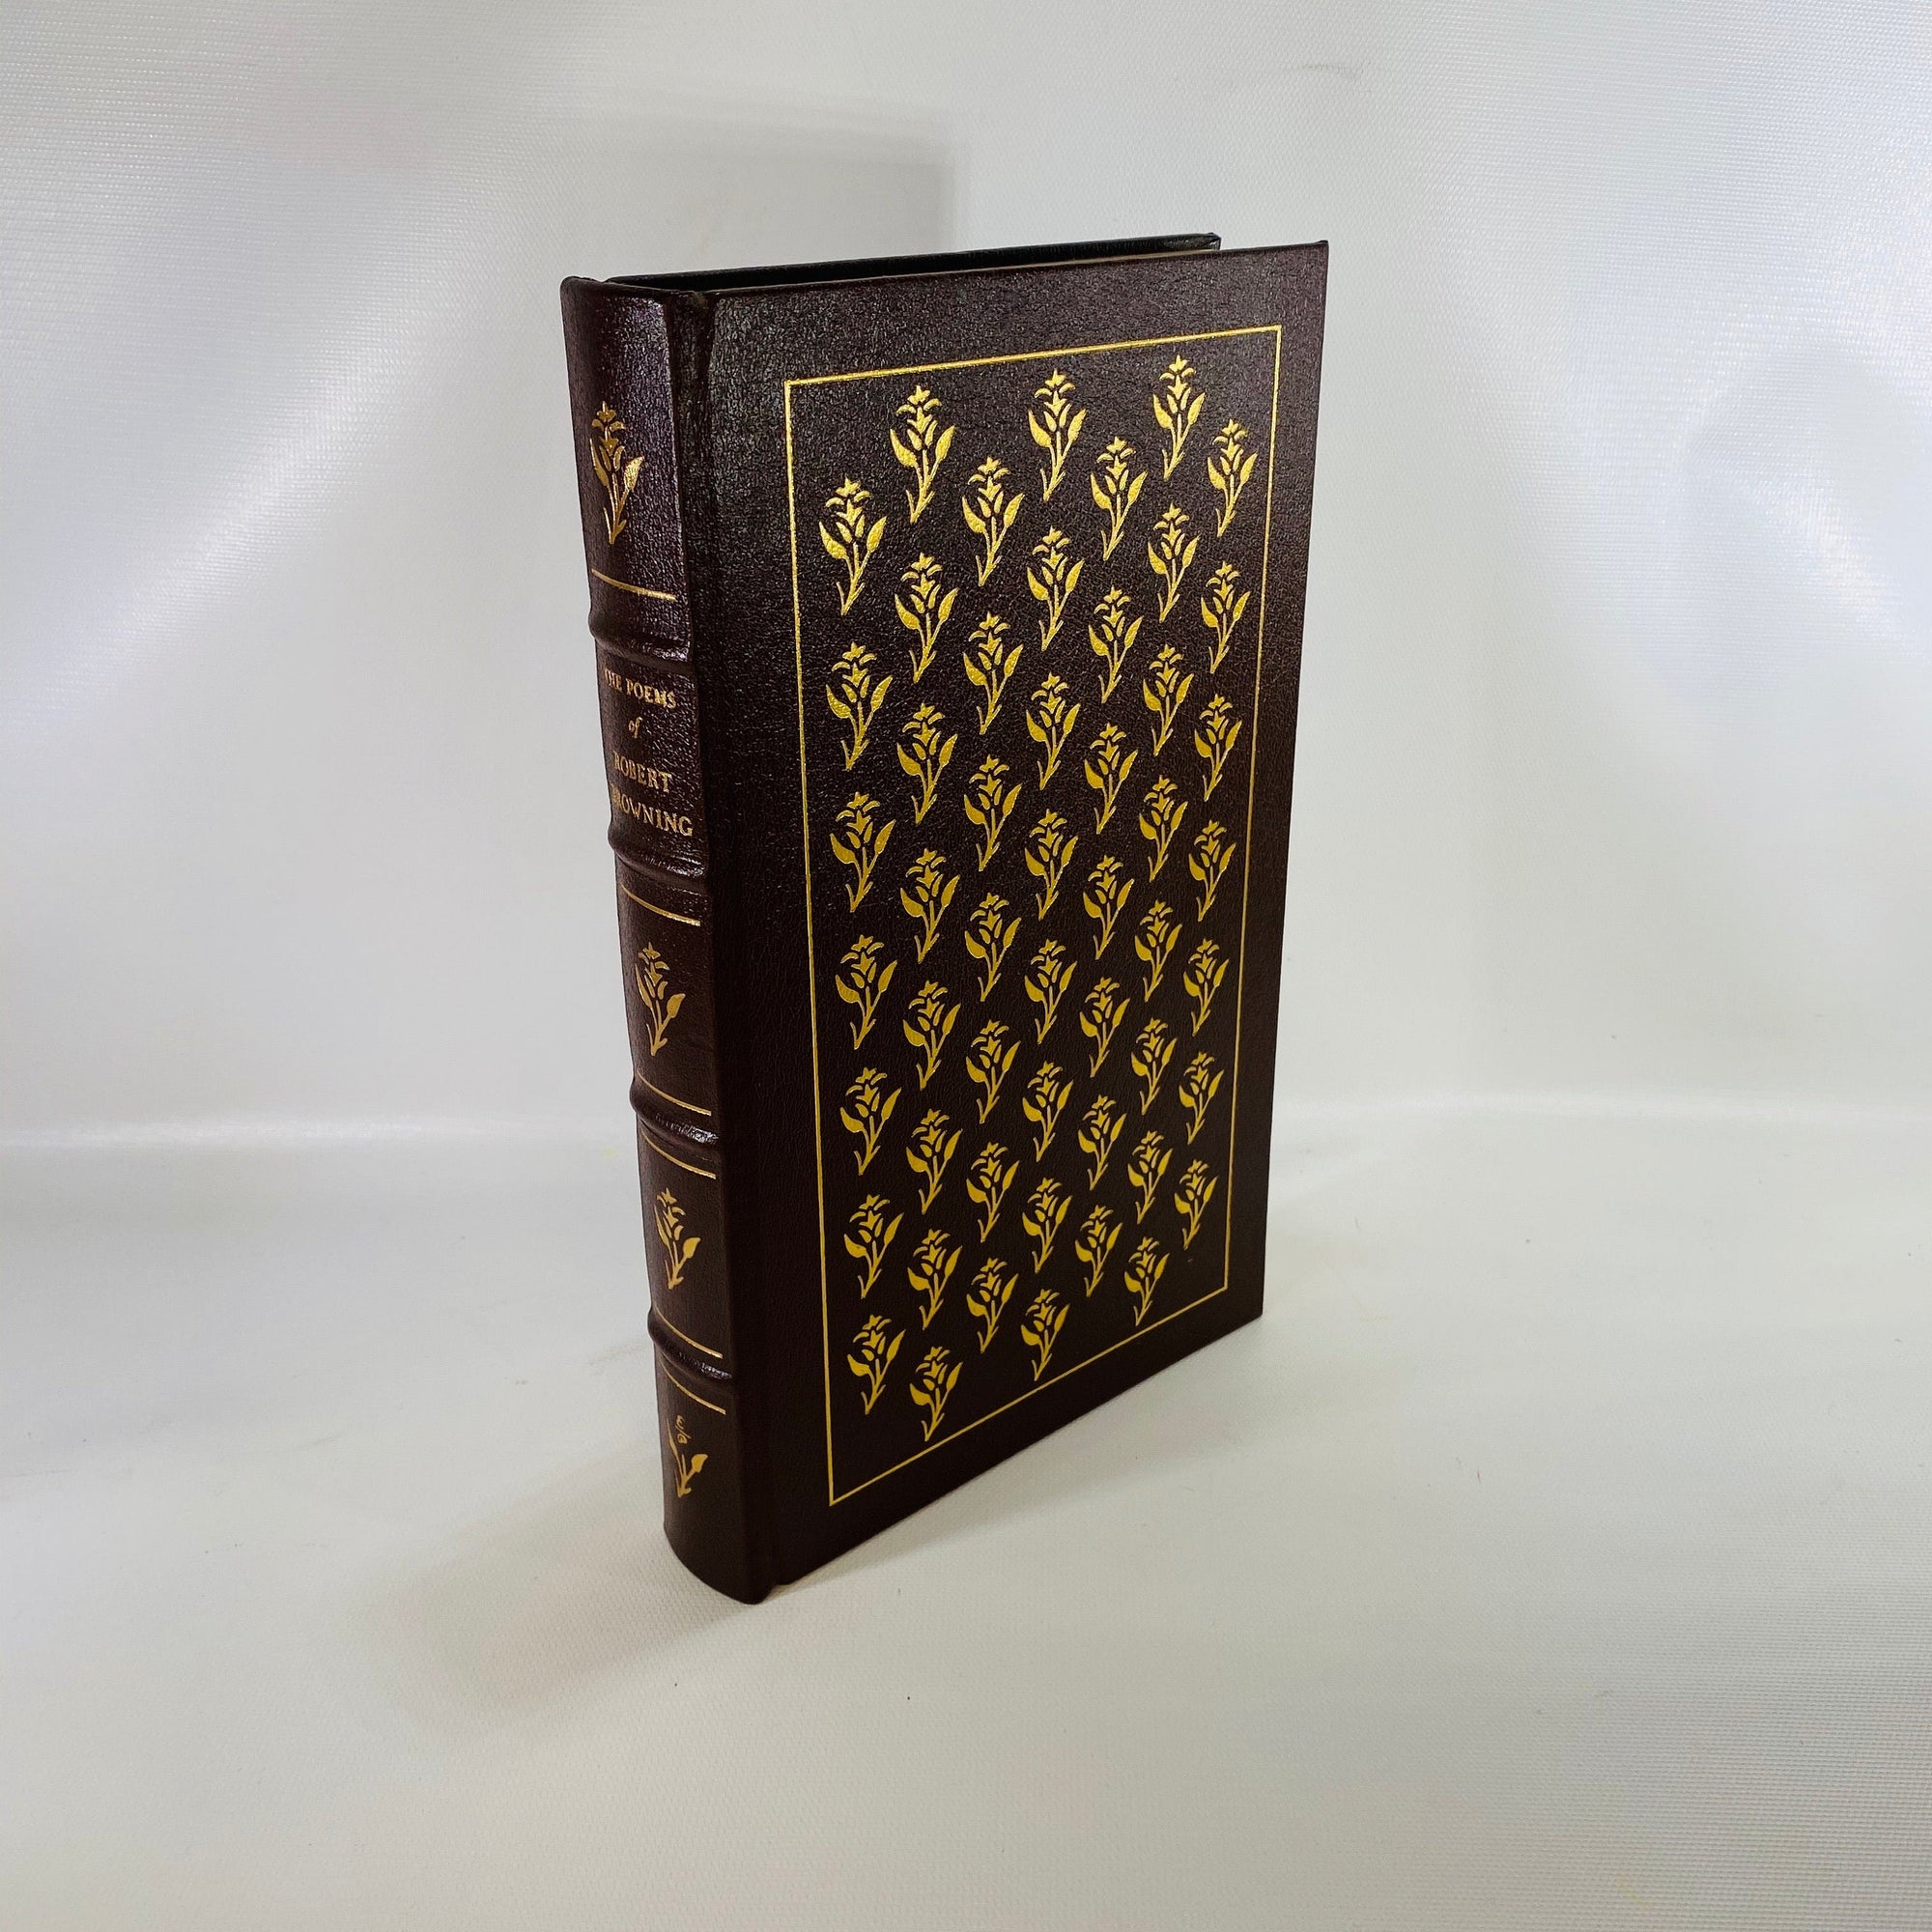 The Poems of Robert Browning illustrated with Wood Engravings 1979 Easton Press part of the 100 Greatest Books